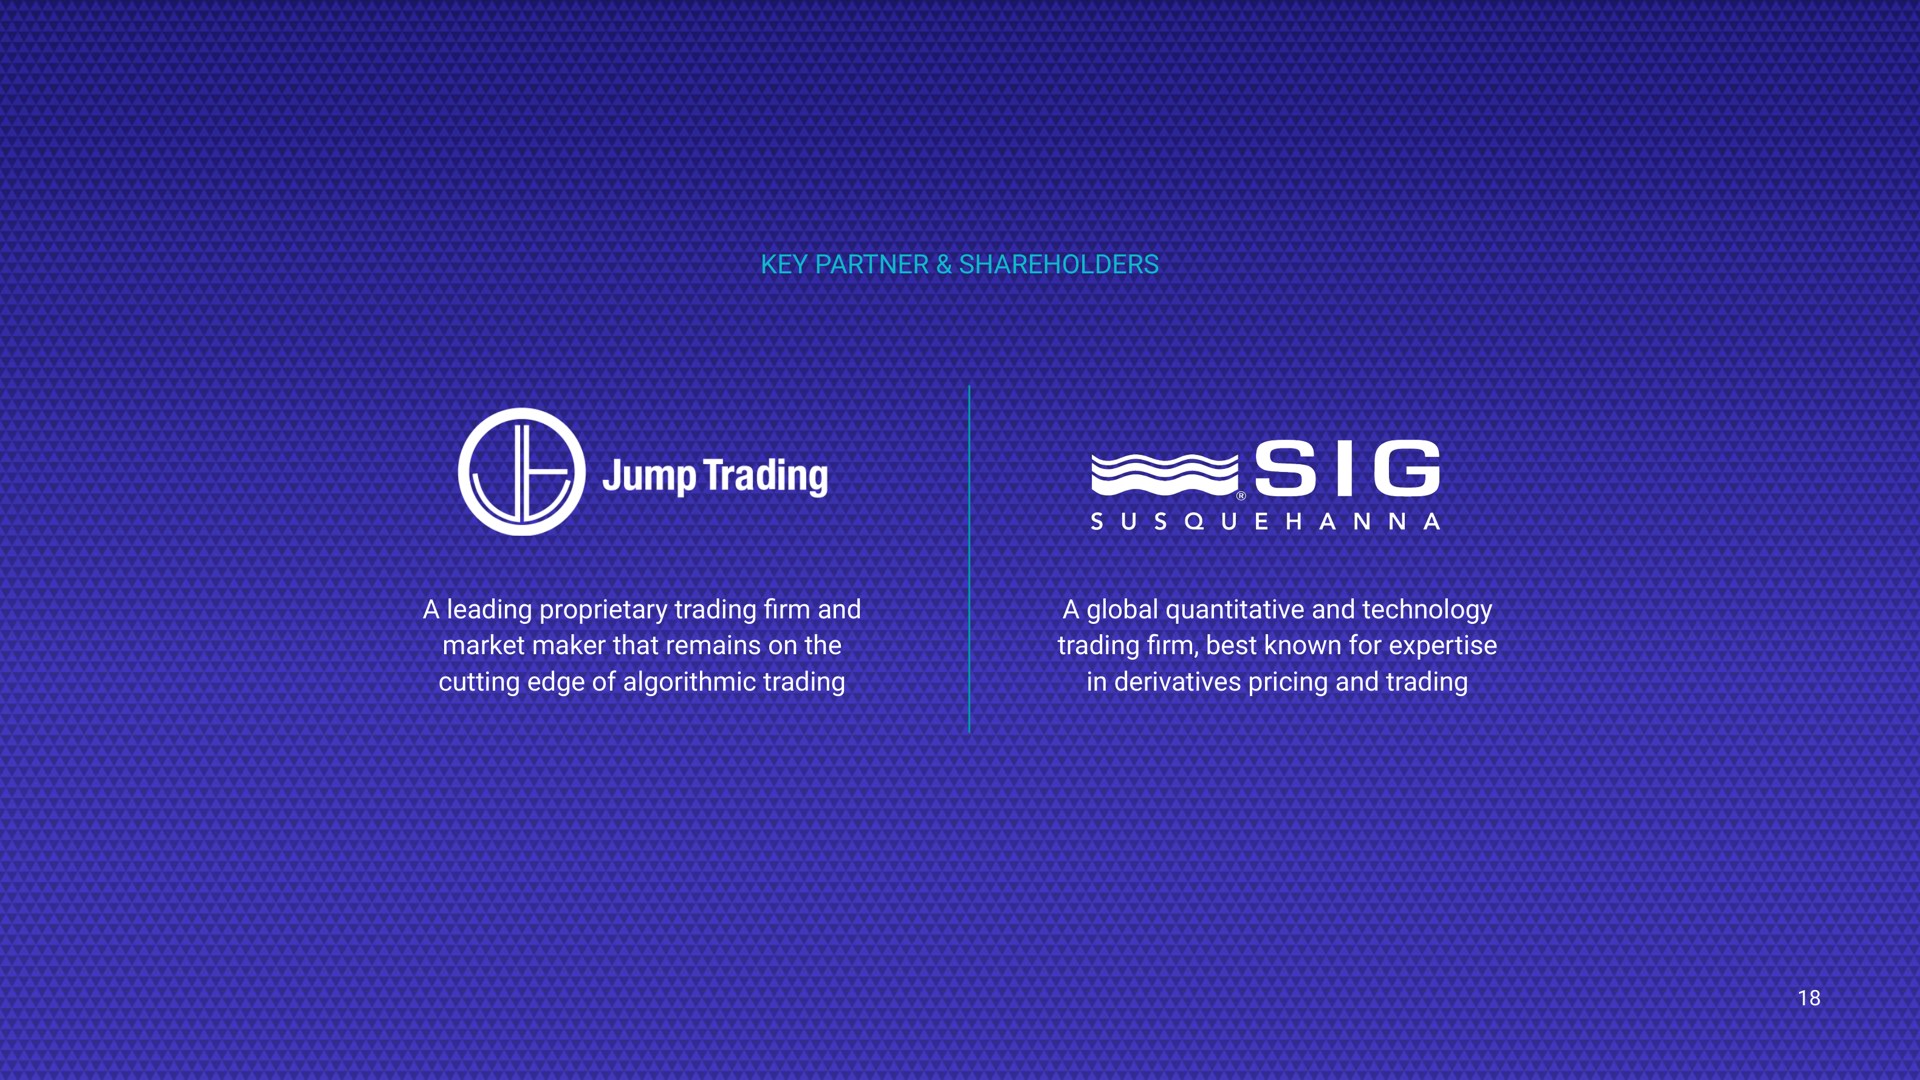 key partner shareholders a leading proprietary trading and market maker that remains on the cutting edge of algorithmic trading a global quantitative and technology trading best known for in derivatives pricing and trading jump fey firm firm | Voyager Digital